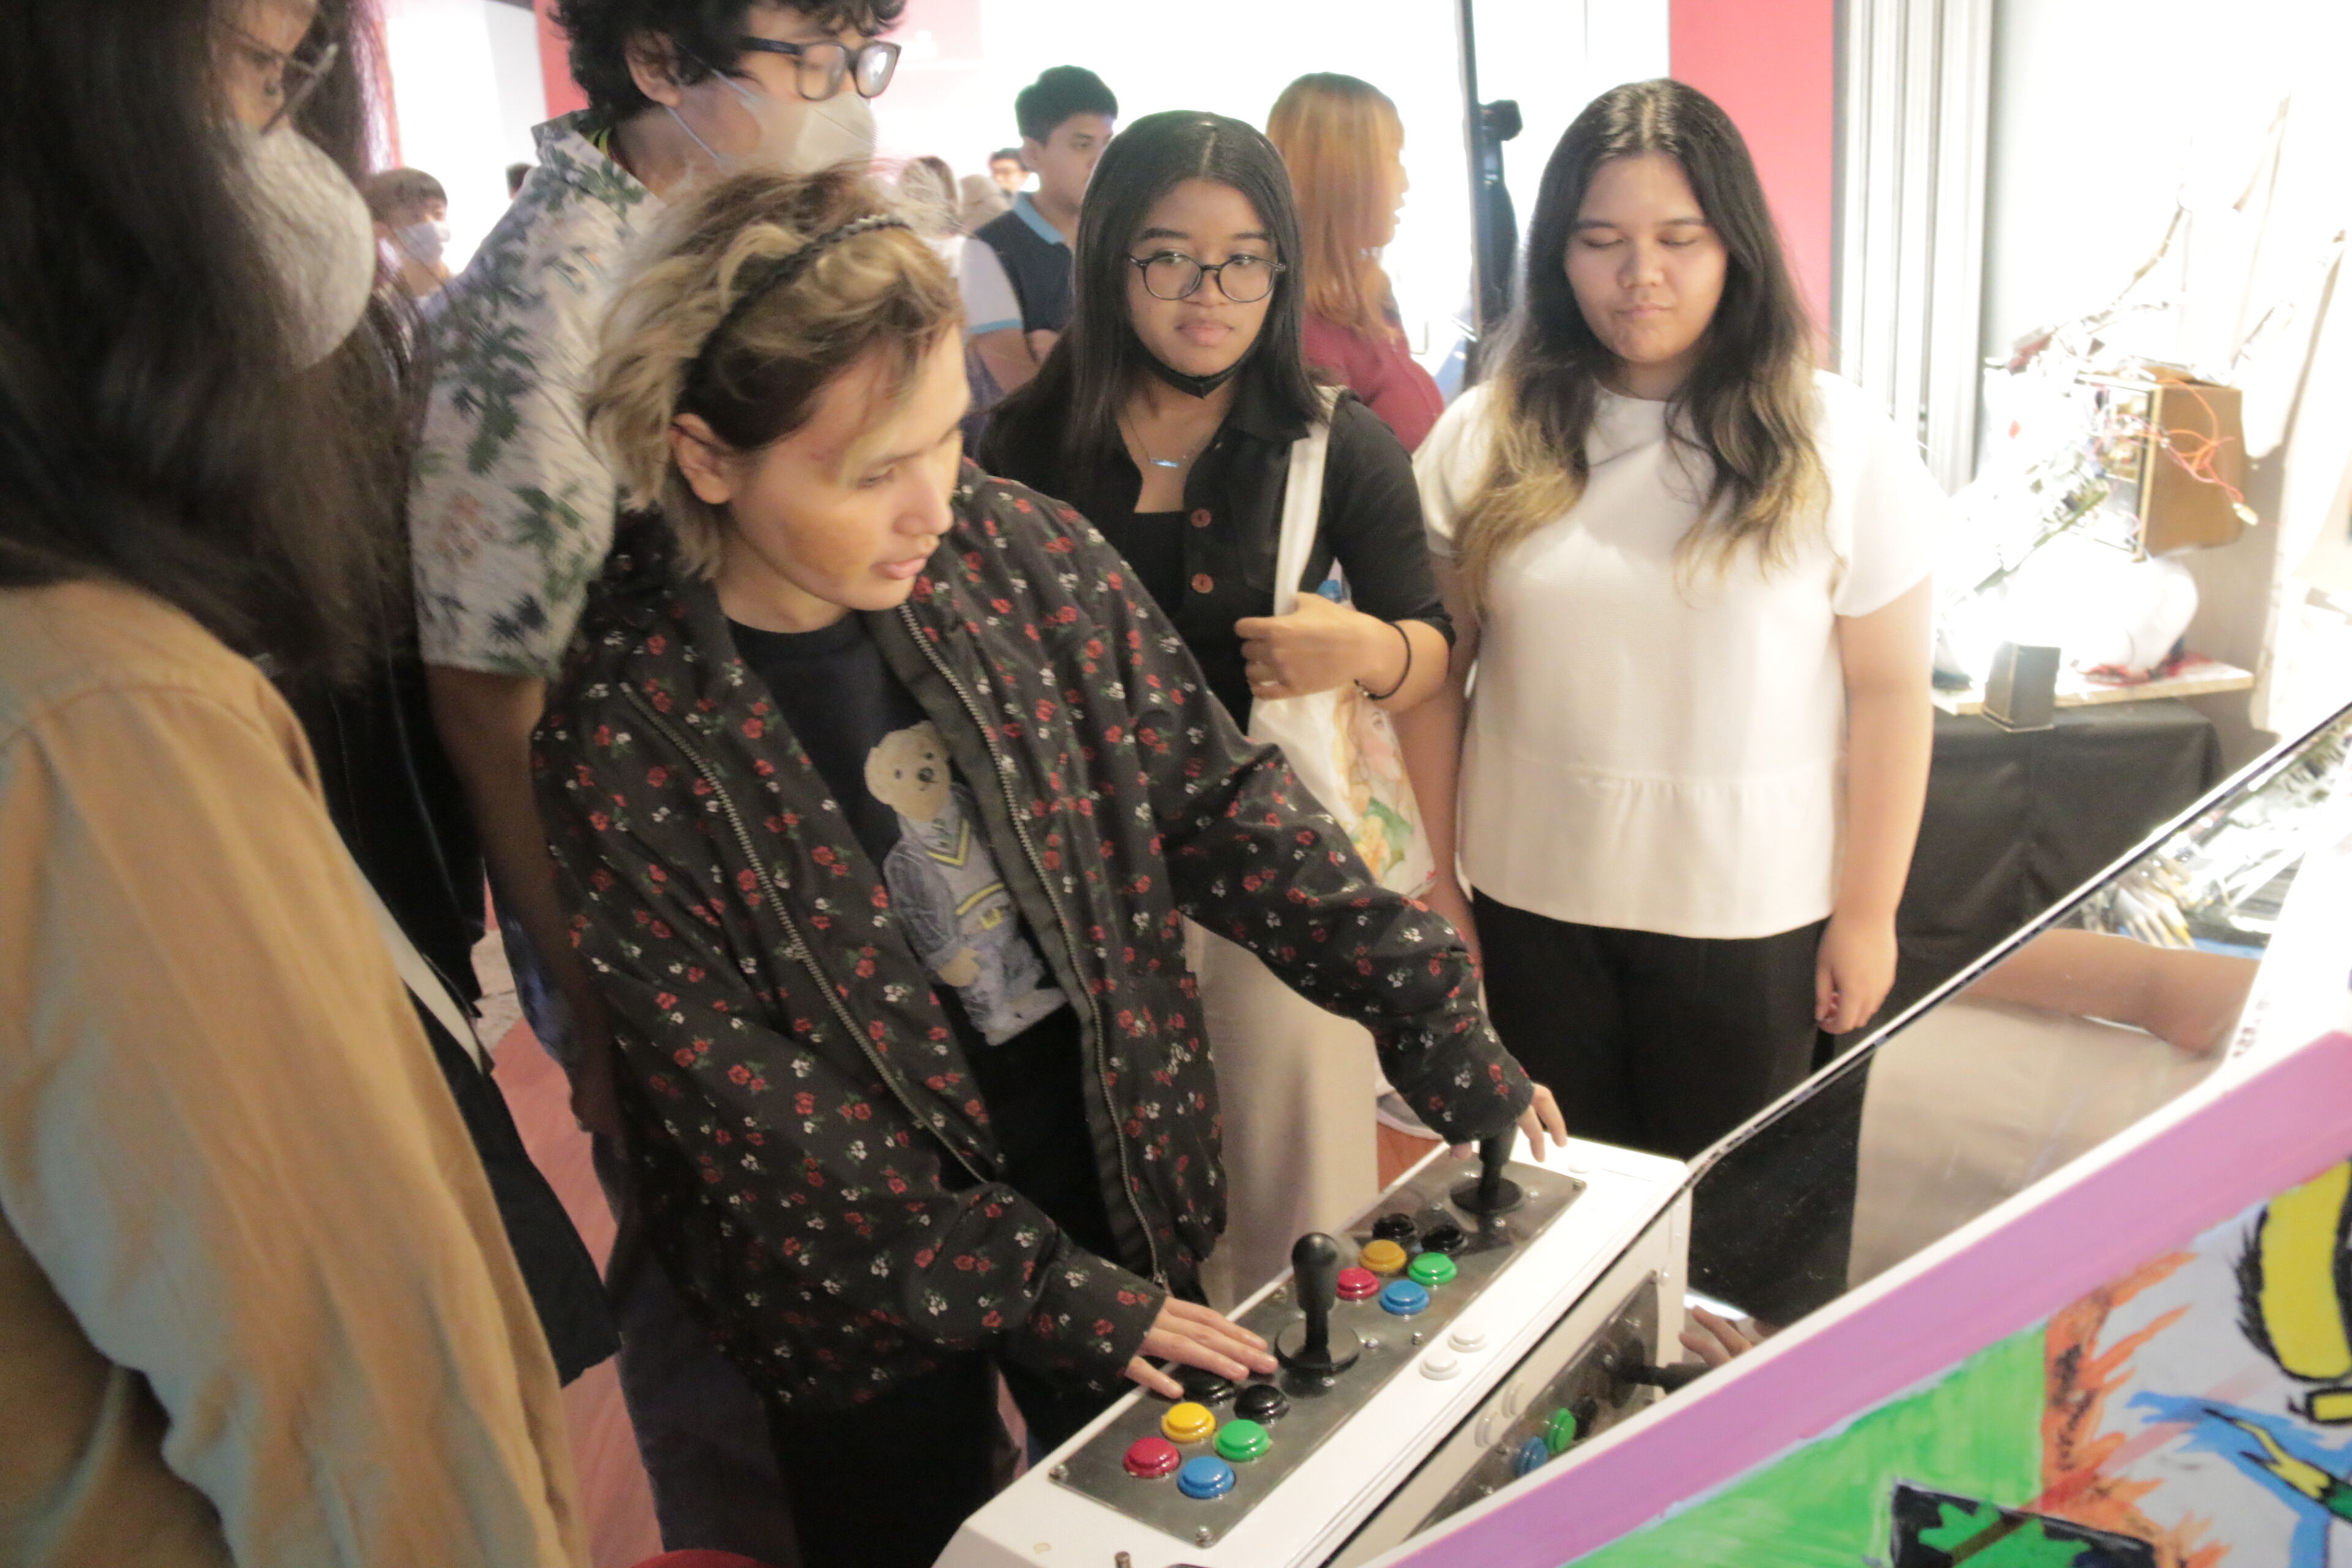 A group of individuals engaging with an arcade game, intensely focused on the activity.